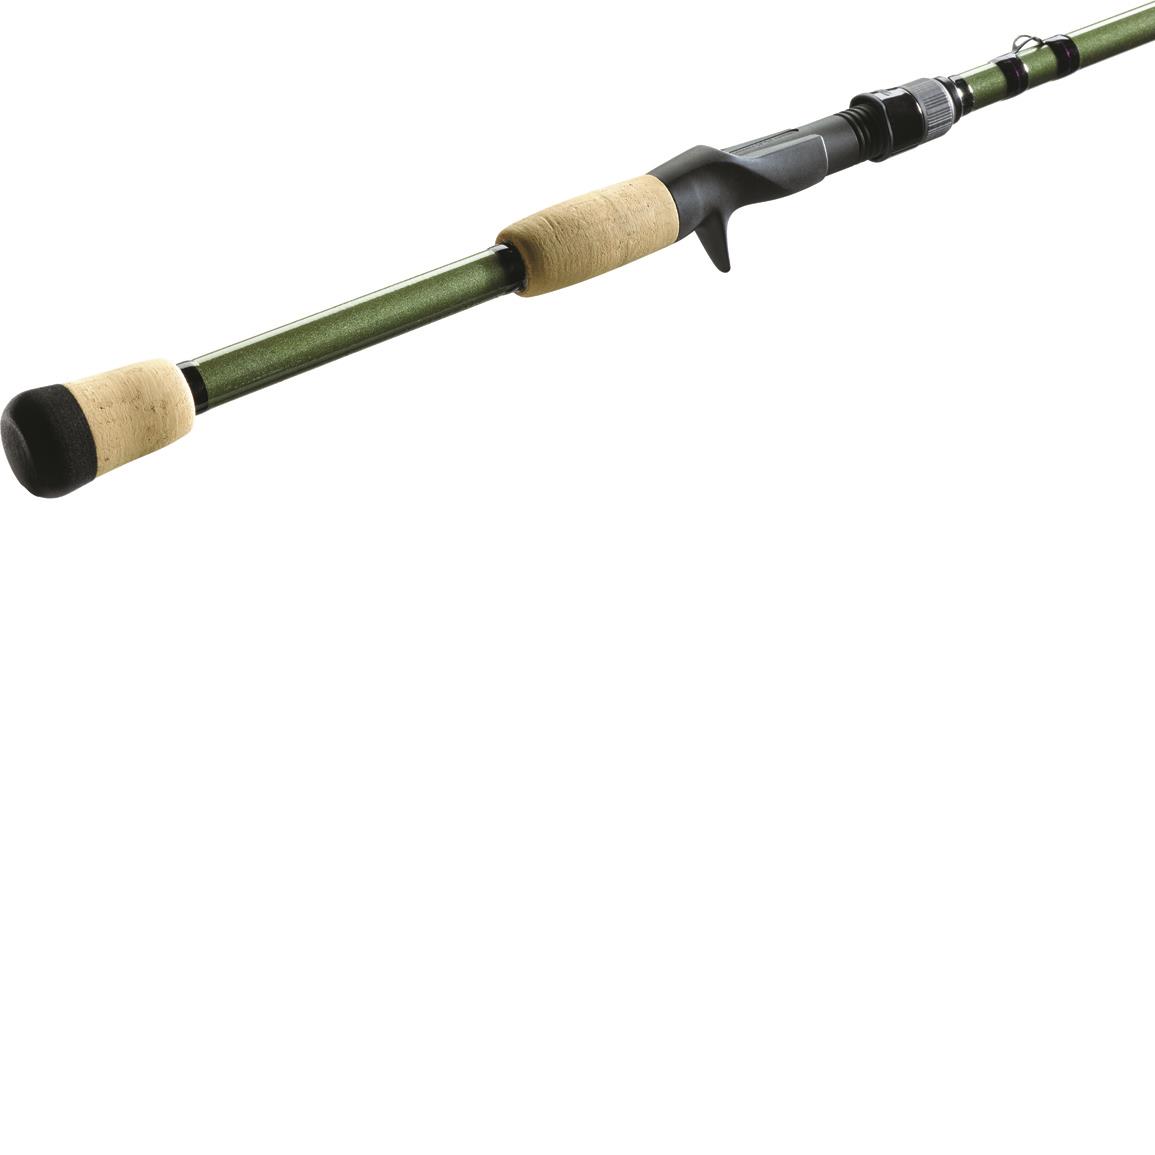 St. Croix Mojo Bass Glass Casting Rod, 7'2" Length, Heavy Power, Moderate Action